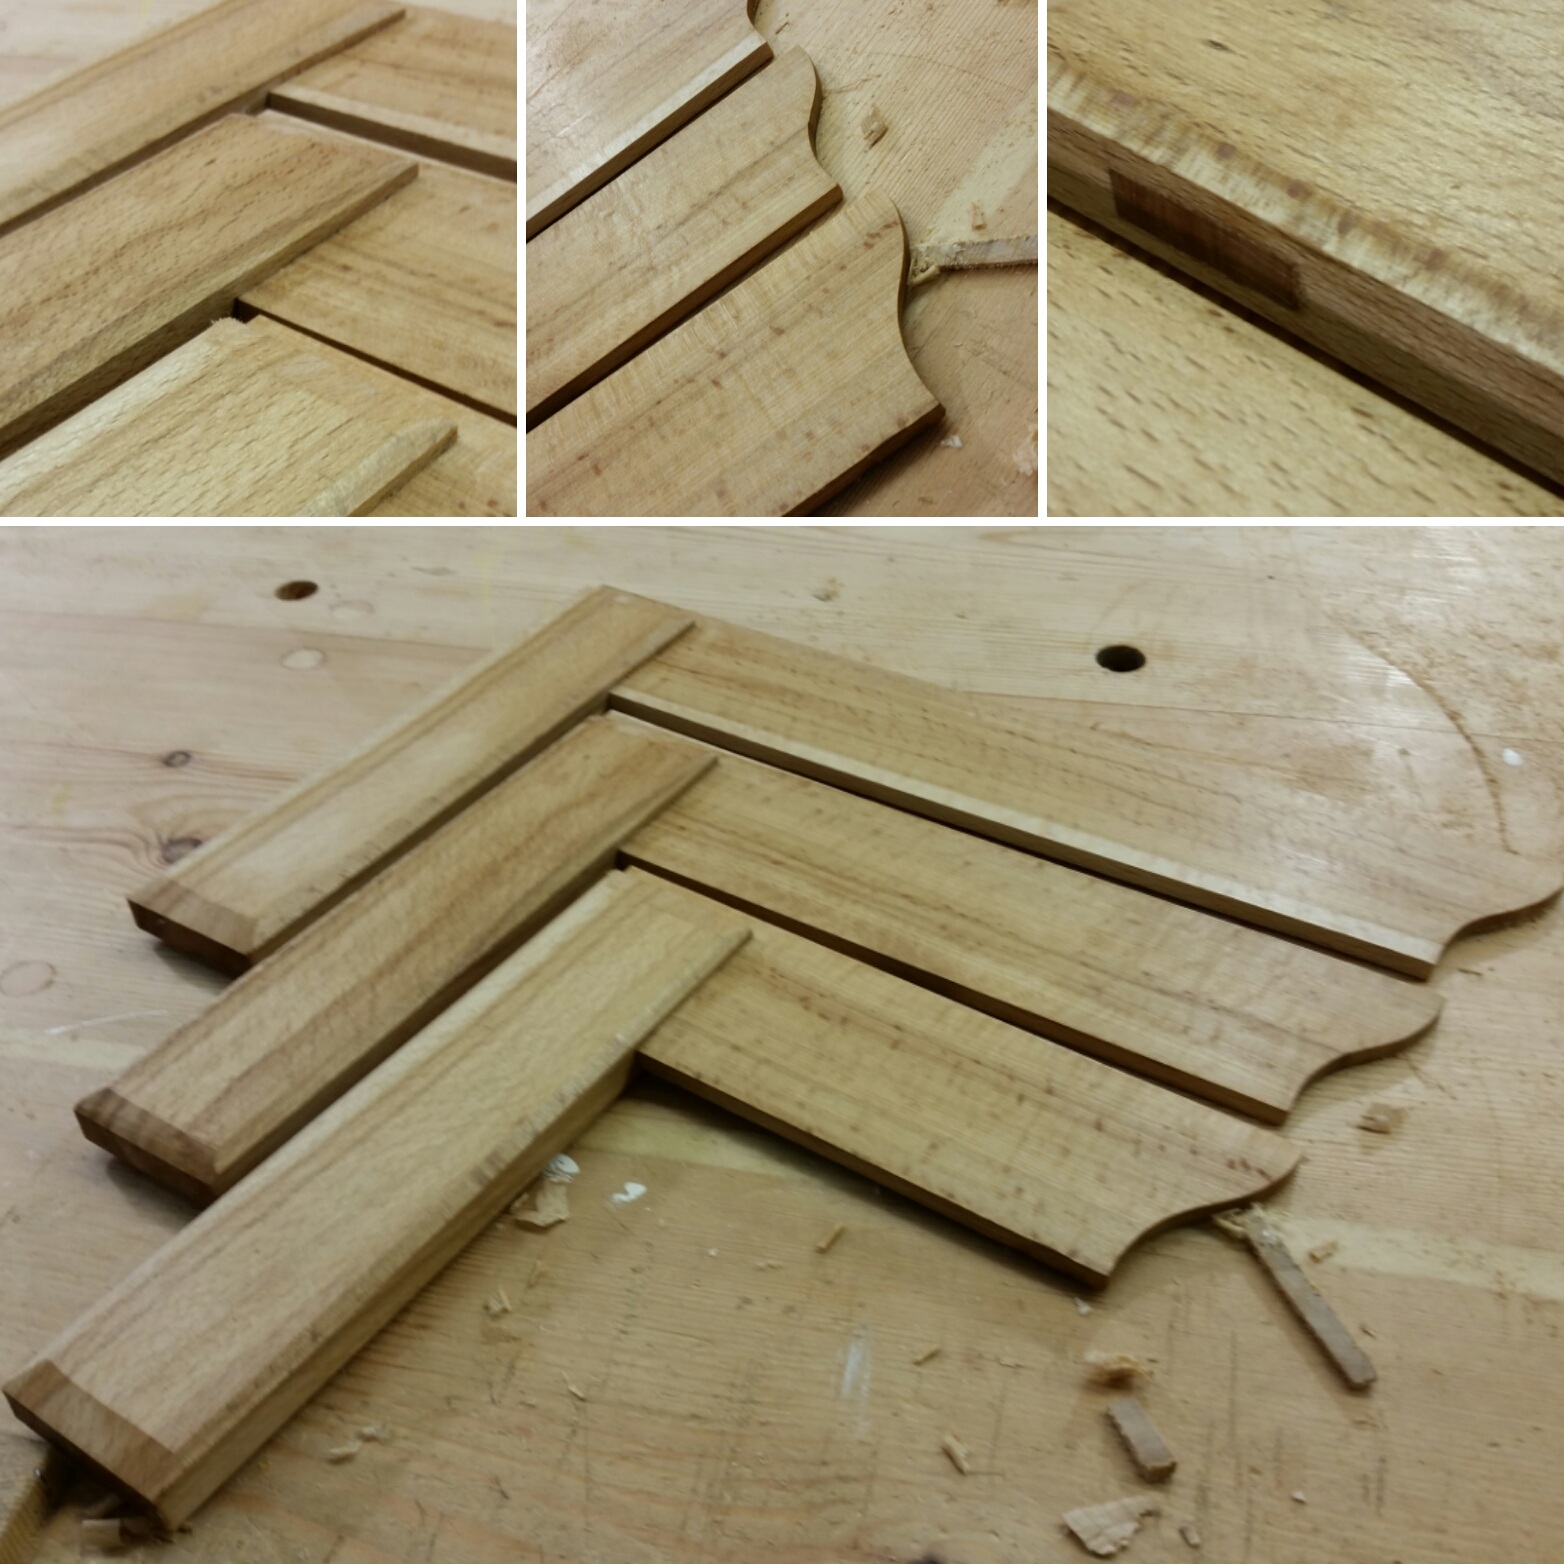 Make Your Own Wood T Square / Woodworking Project 